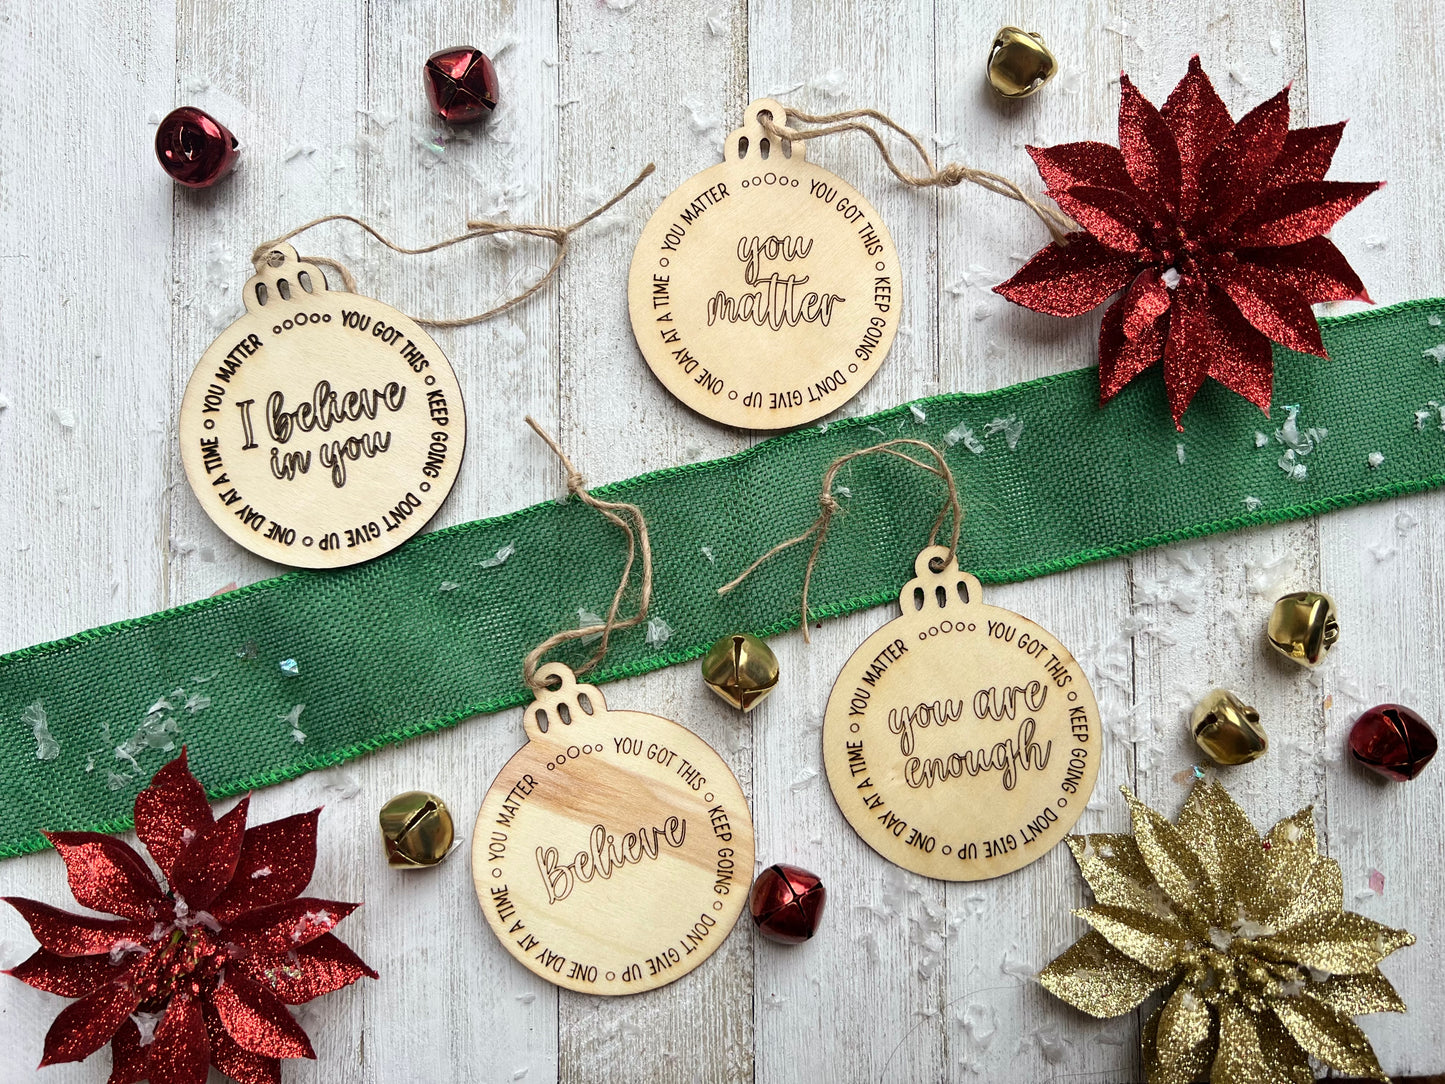 Affirmations Christmas Ornaments (Set of 4)